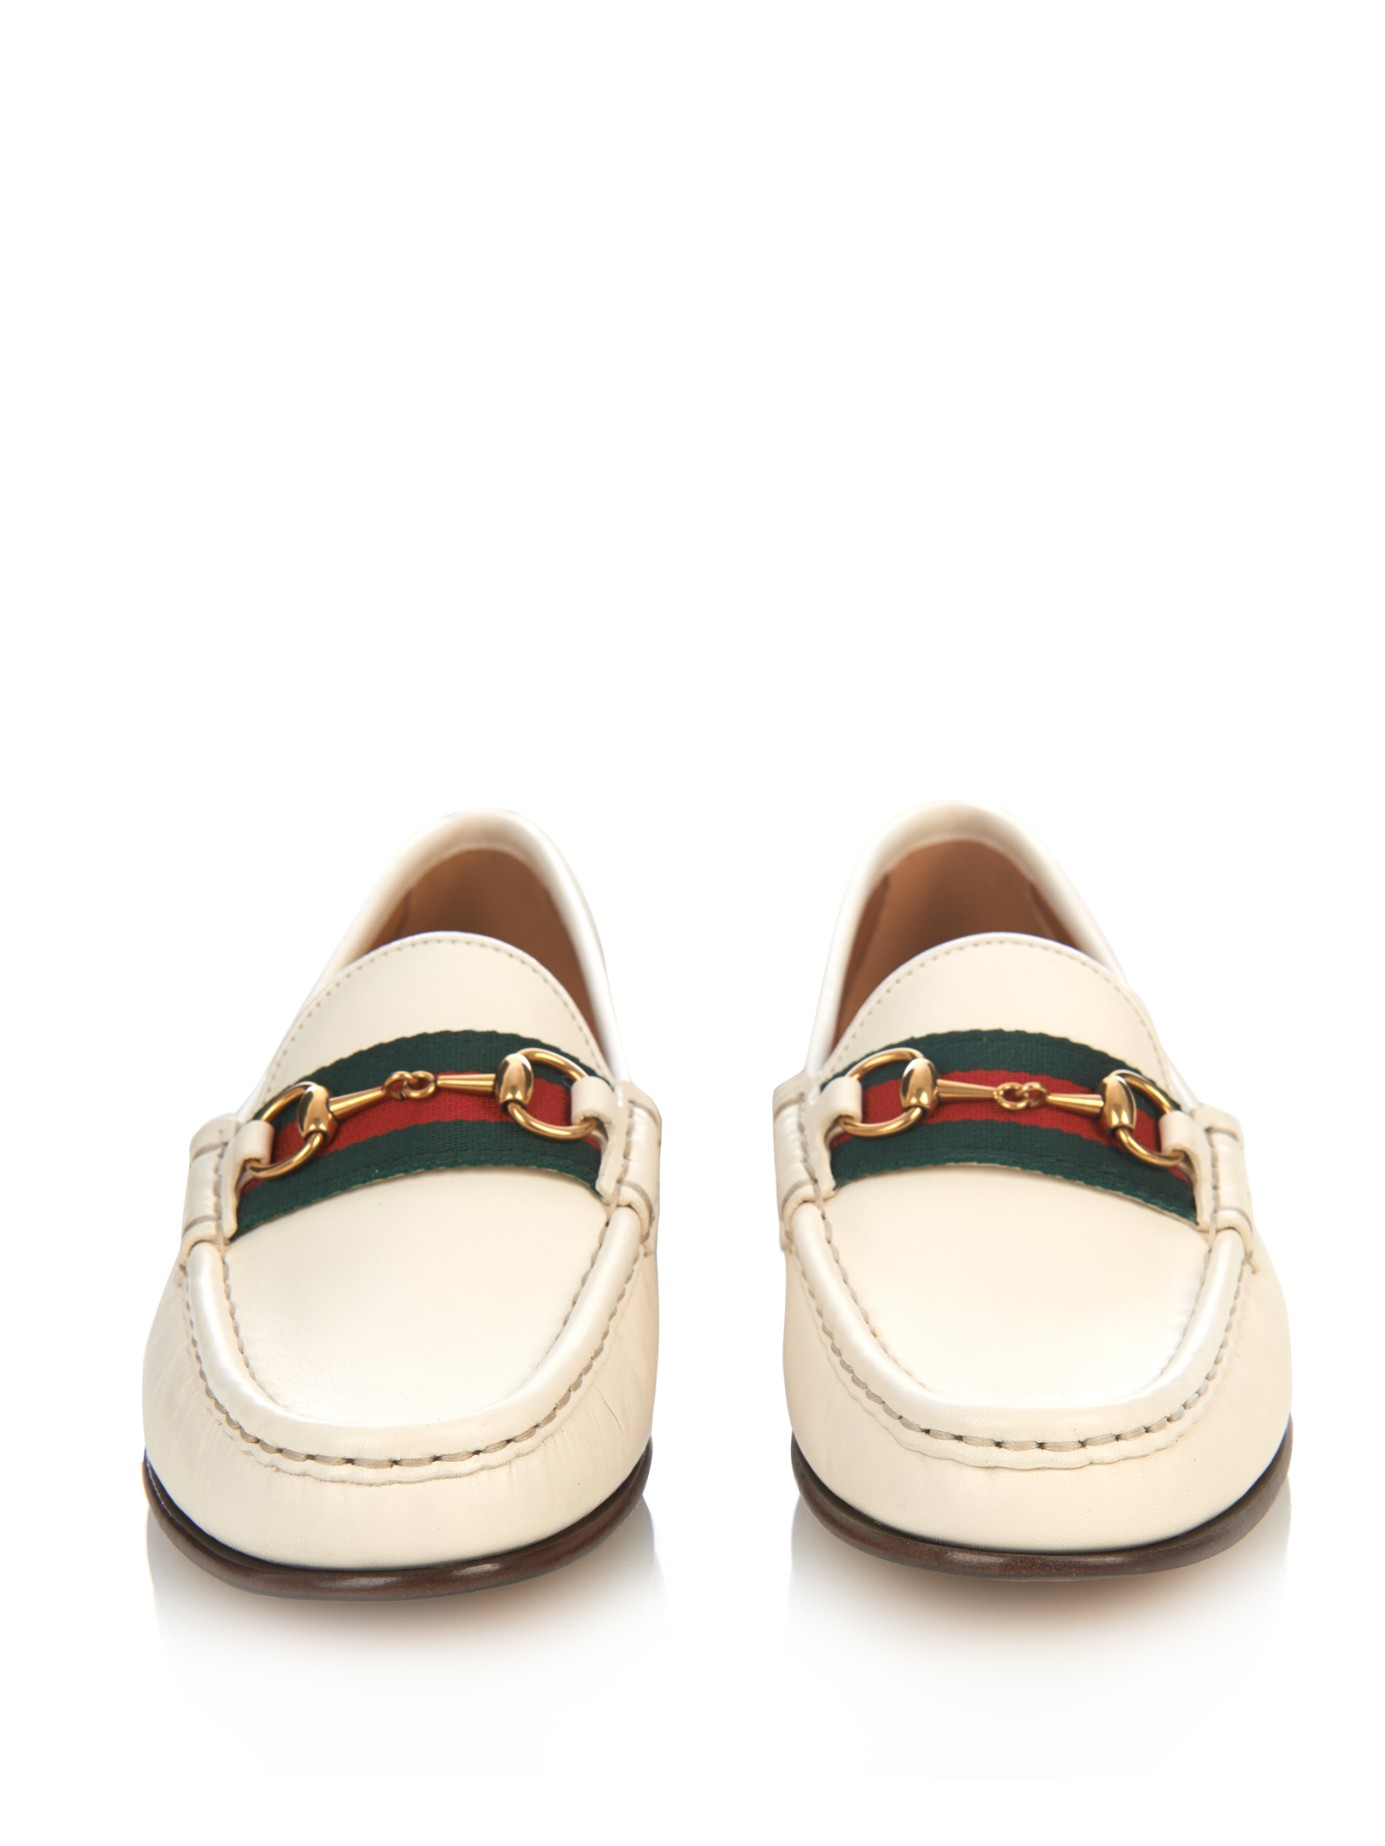 Gucci Horsebit and Web Leather Loafers in White | Lyst